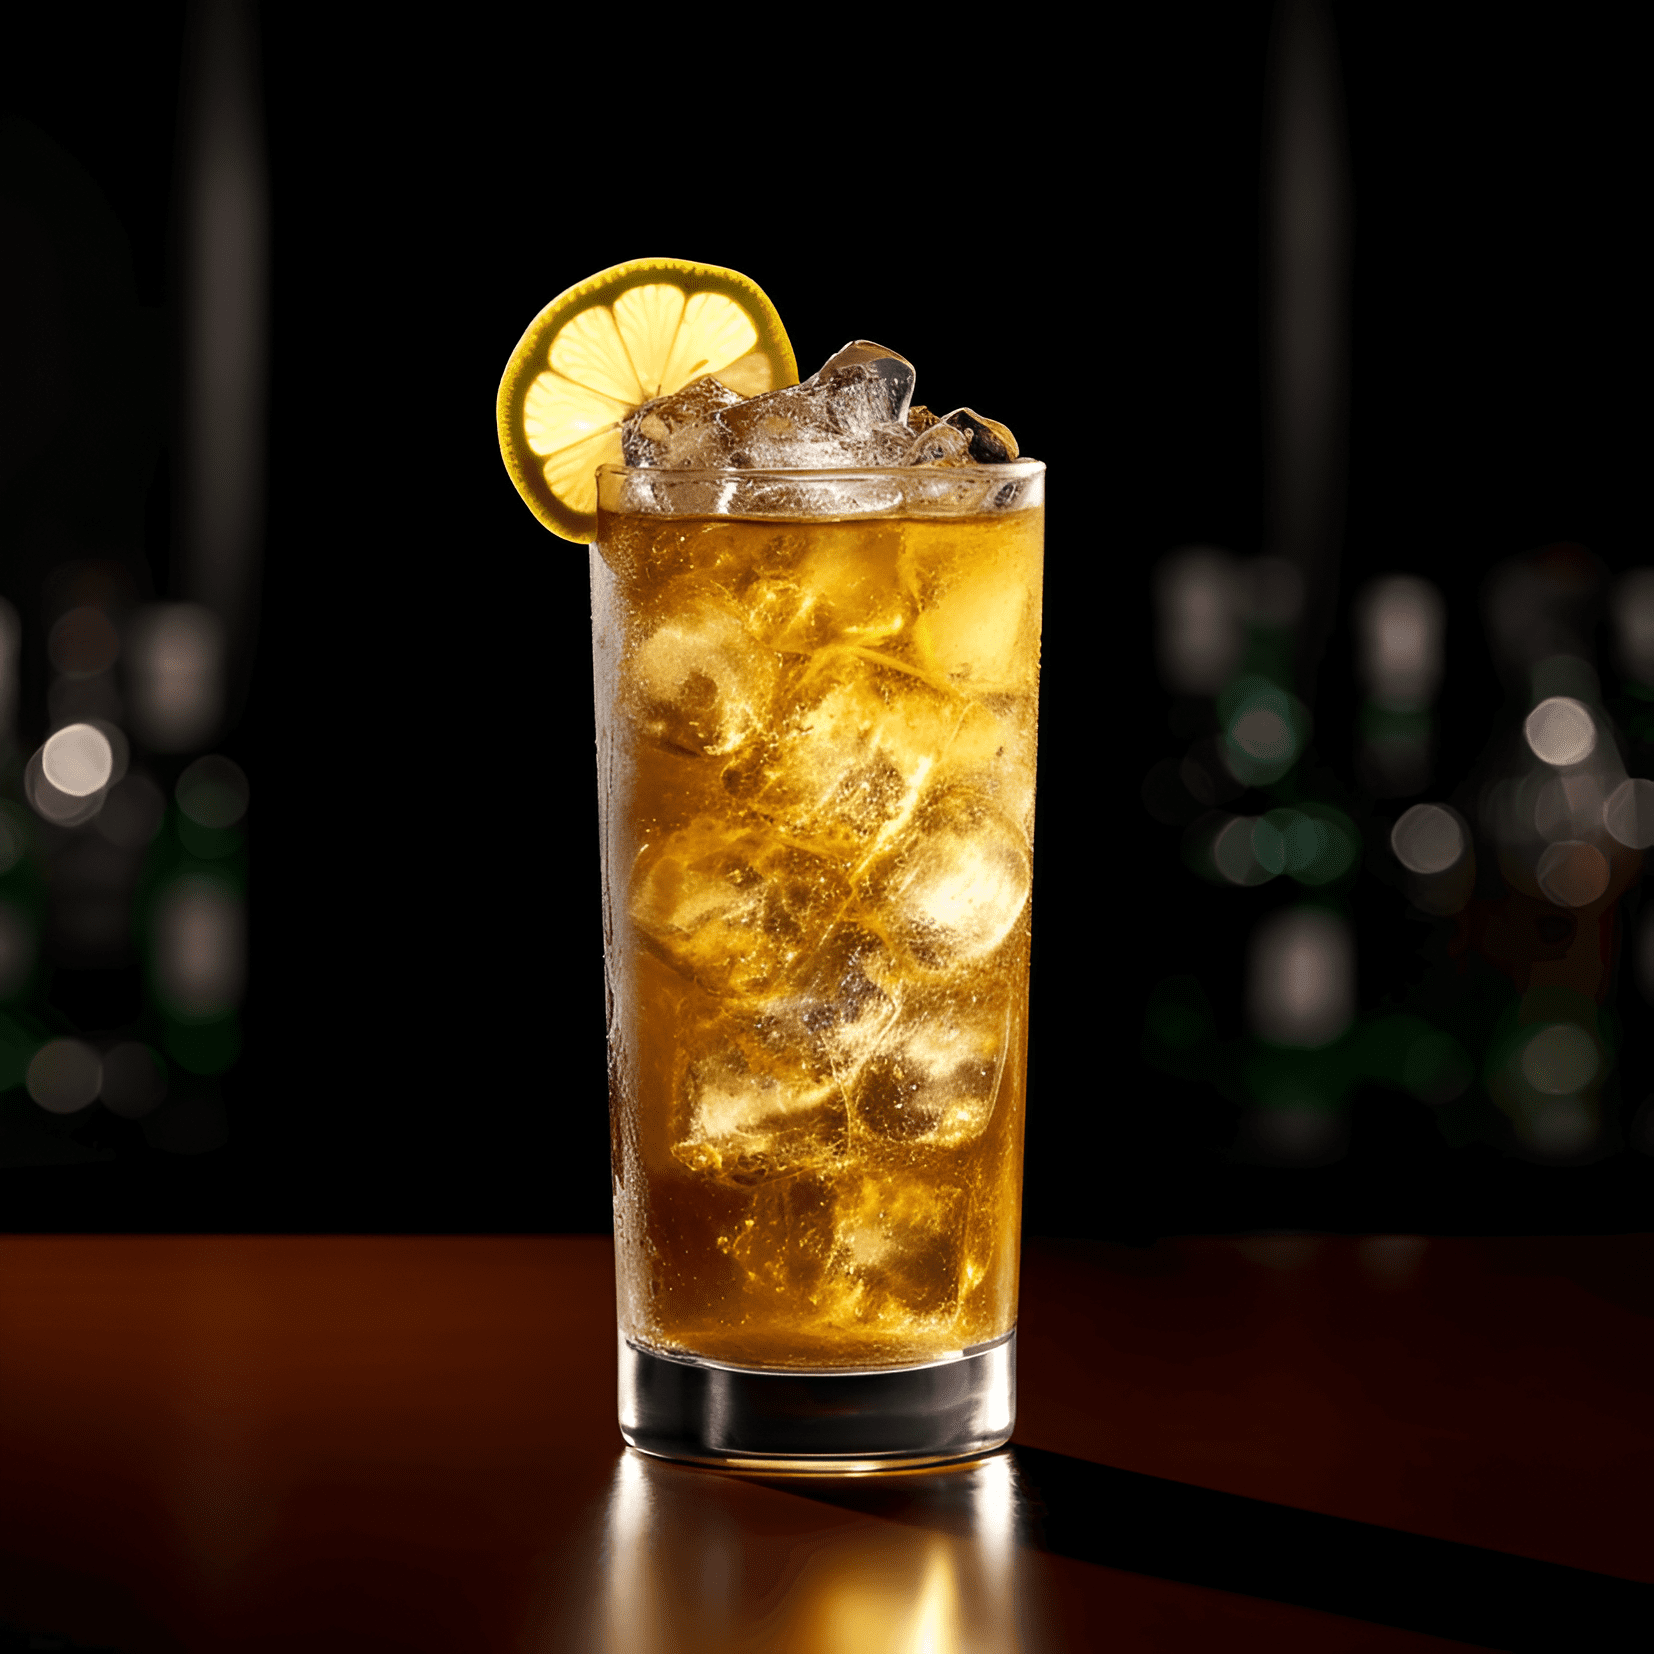 Club Special Cocktail Recipe - The Club Special cocktail has a refreshing and well-balanced taste, with a combination of sweet, sour, and slightly bitter flavors. It is light and easy to drink, making it perfect for warm weather and outdoor events.